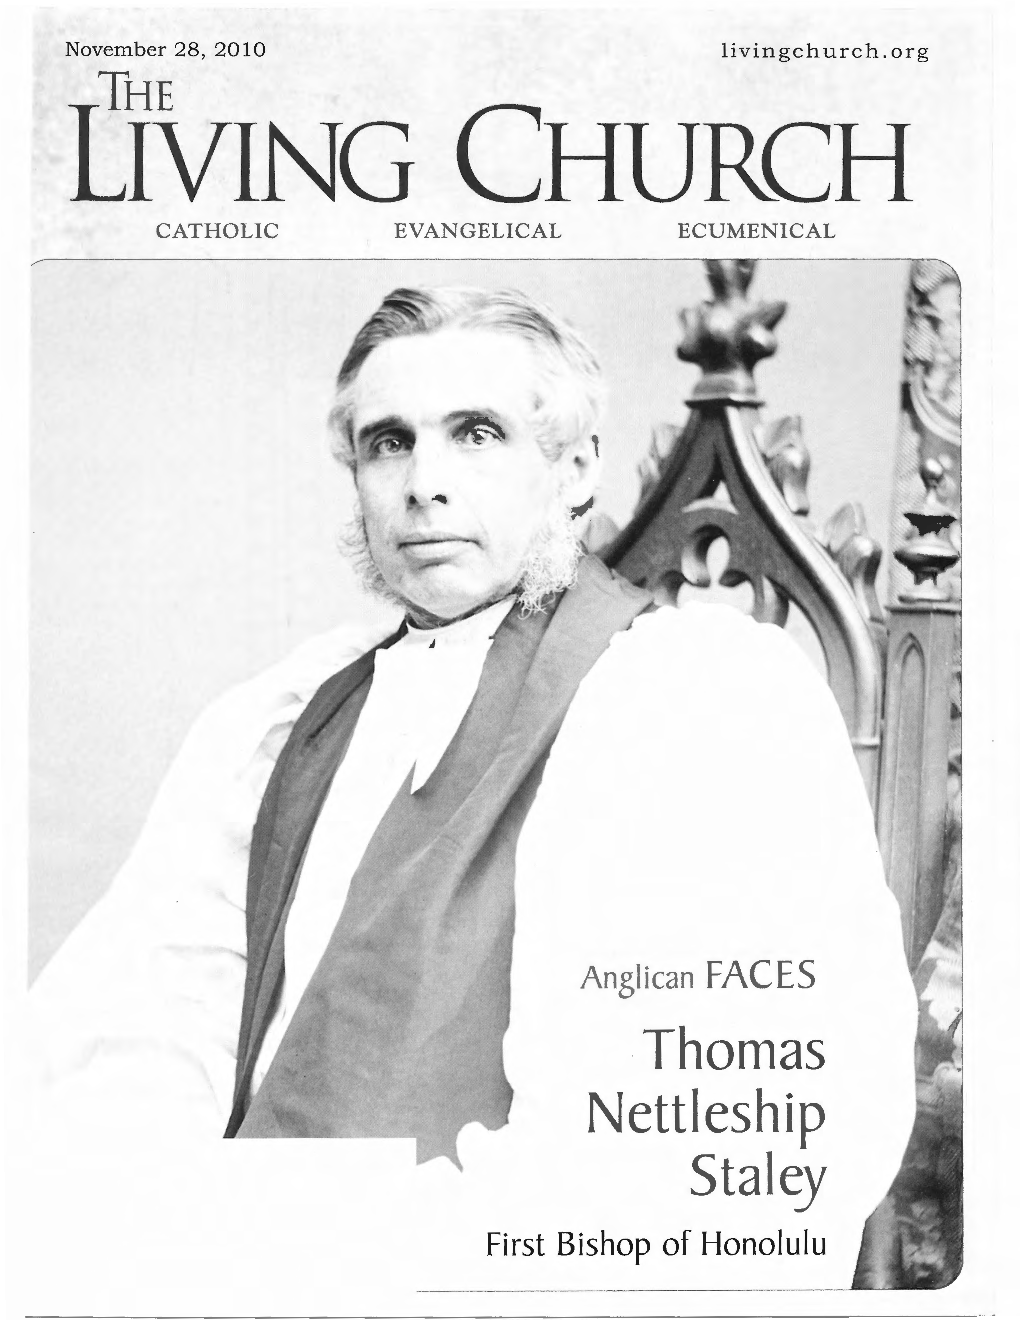 The Living Church Is Published by the Living Church Foundation